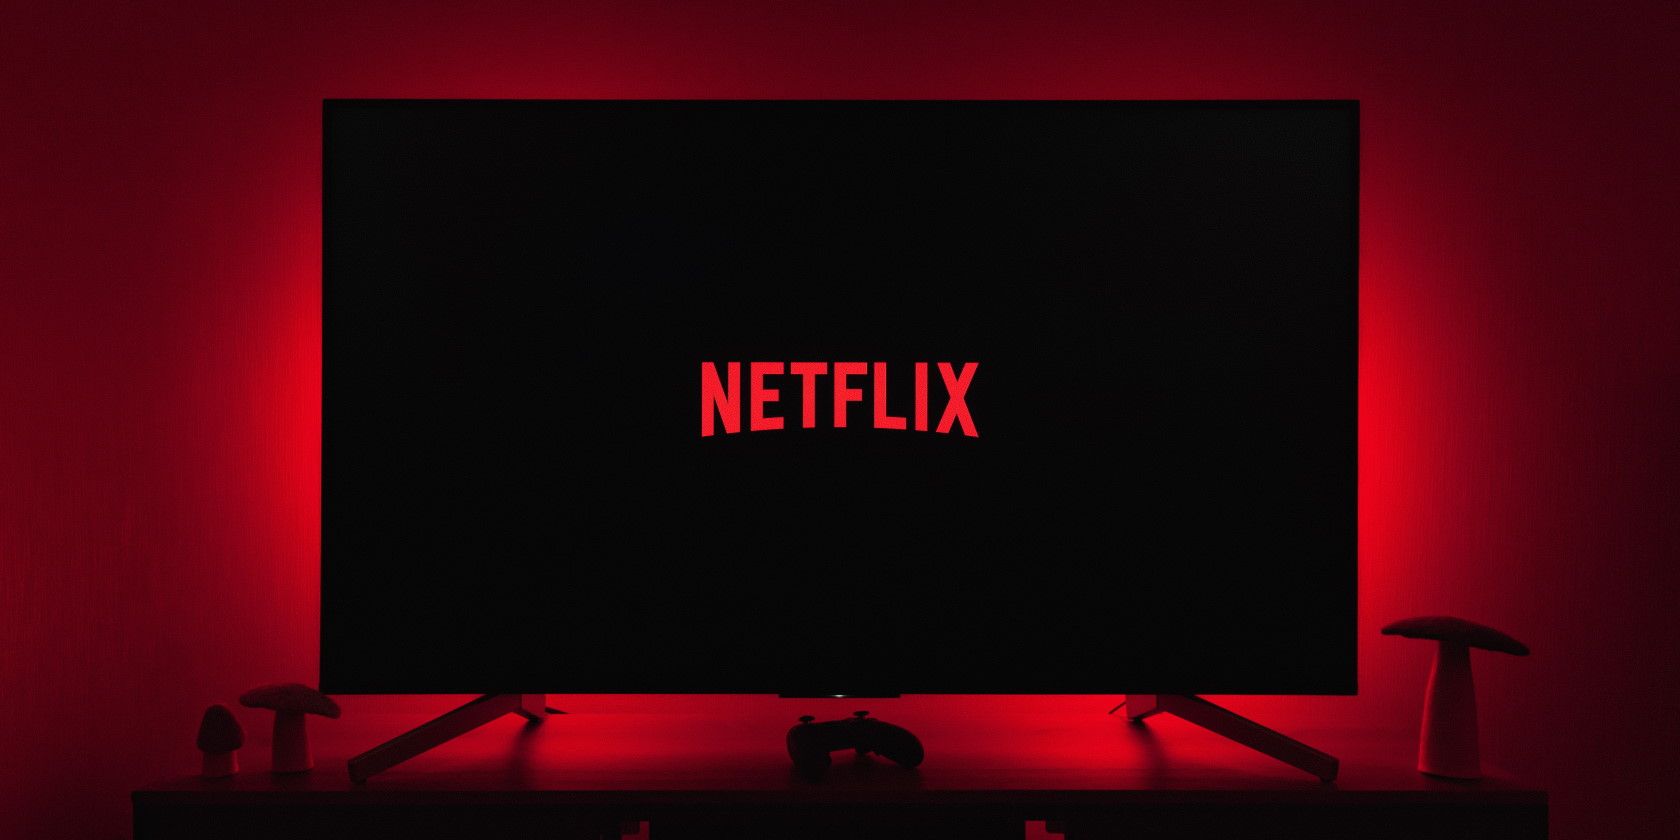 Netflix logo on large Tv screen in dark room with red backlight